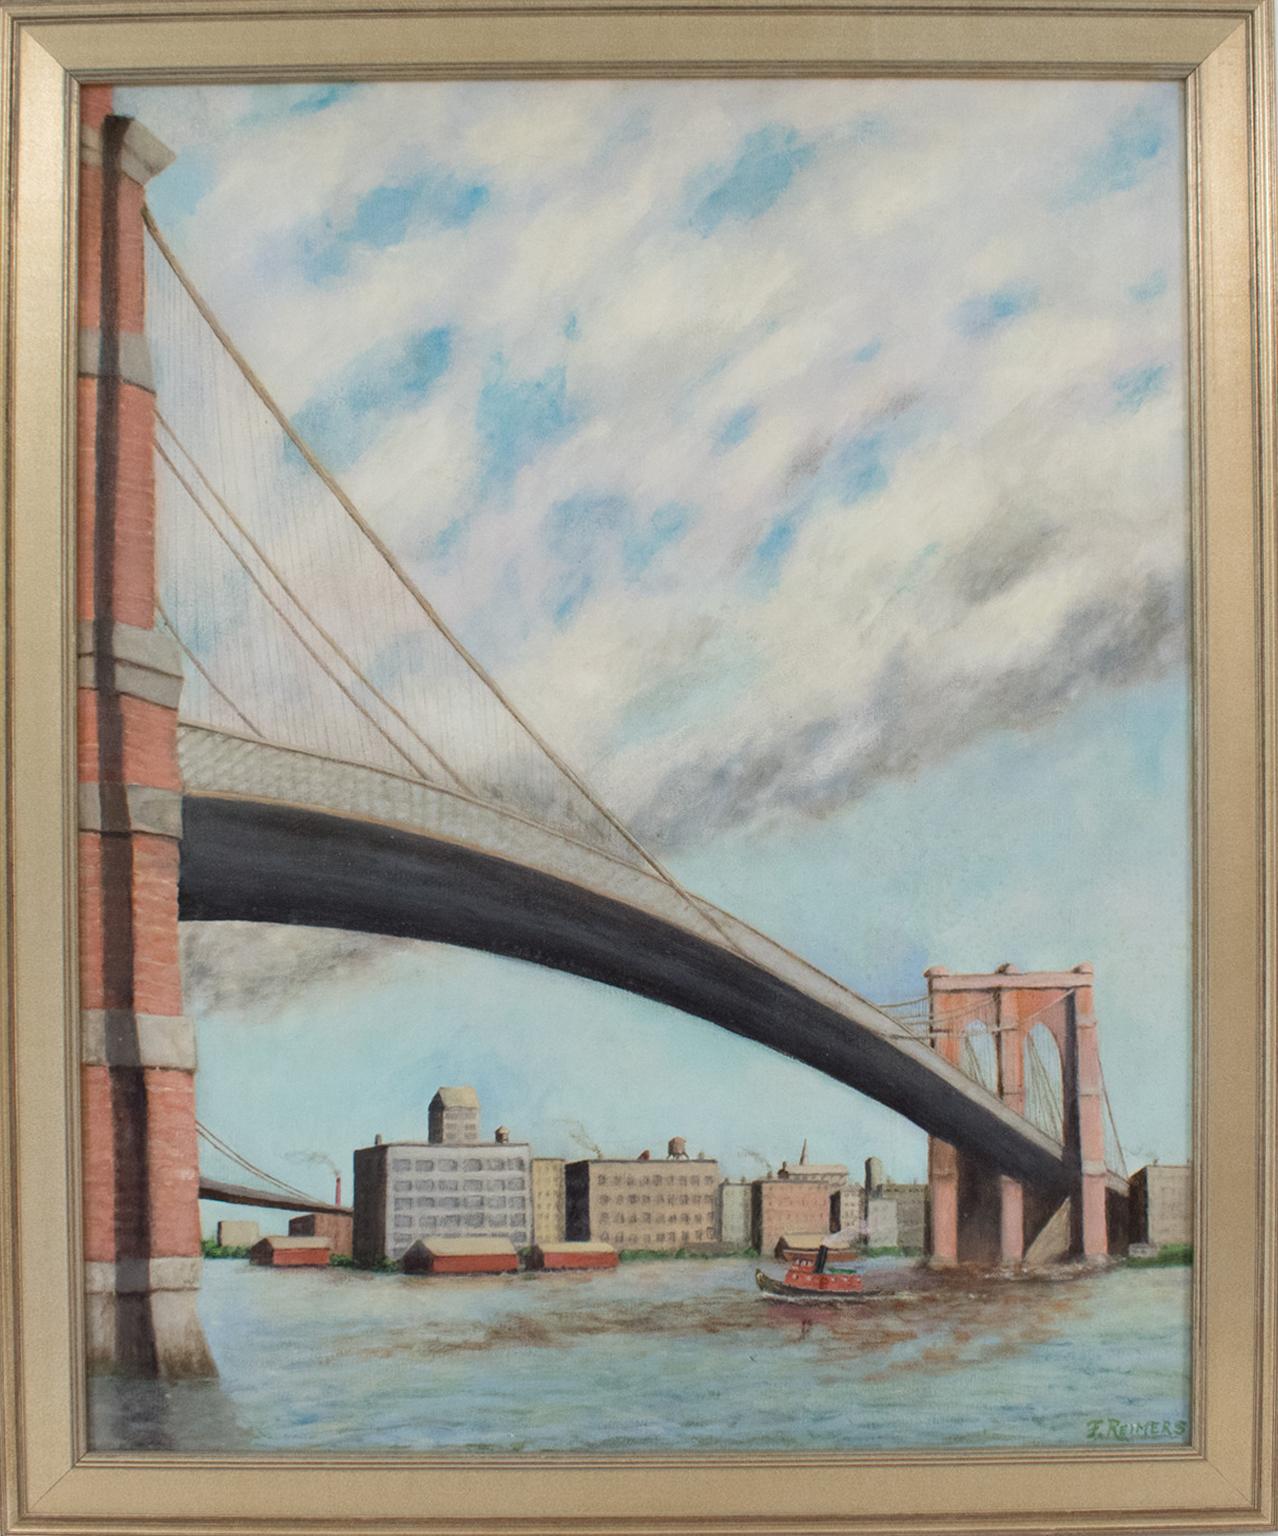 Frederick E. Reimers Landscape Painting - Brooklyn Transfer East River Crossing, Oil on Canvas Painting Frederick Reimers